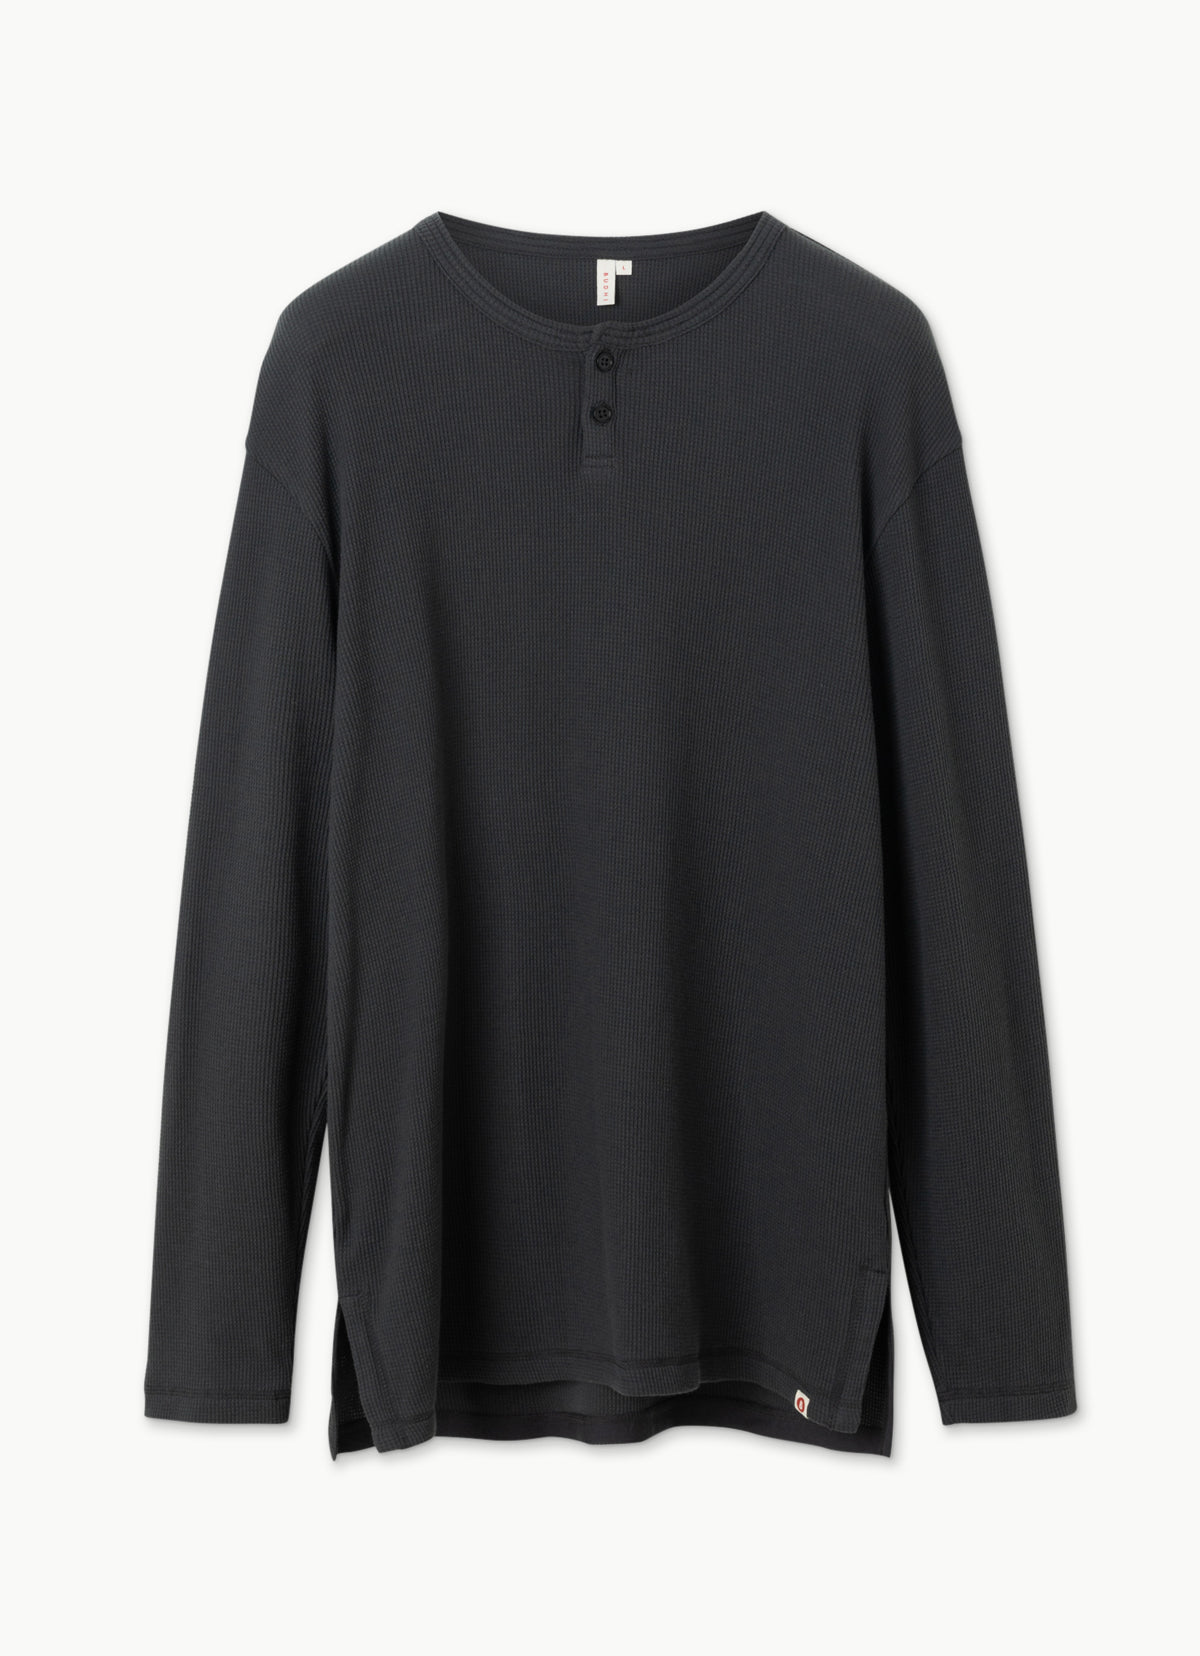 Waffle long sleeve t-shirts (For Men)_Charcoal